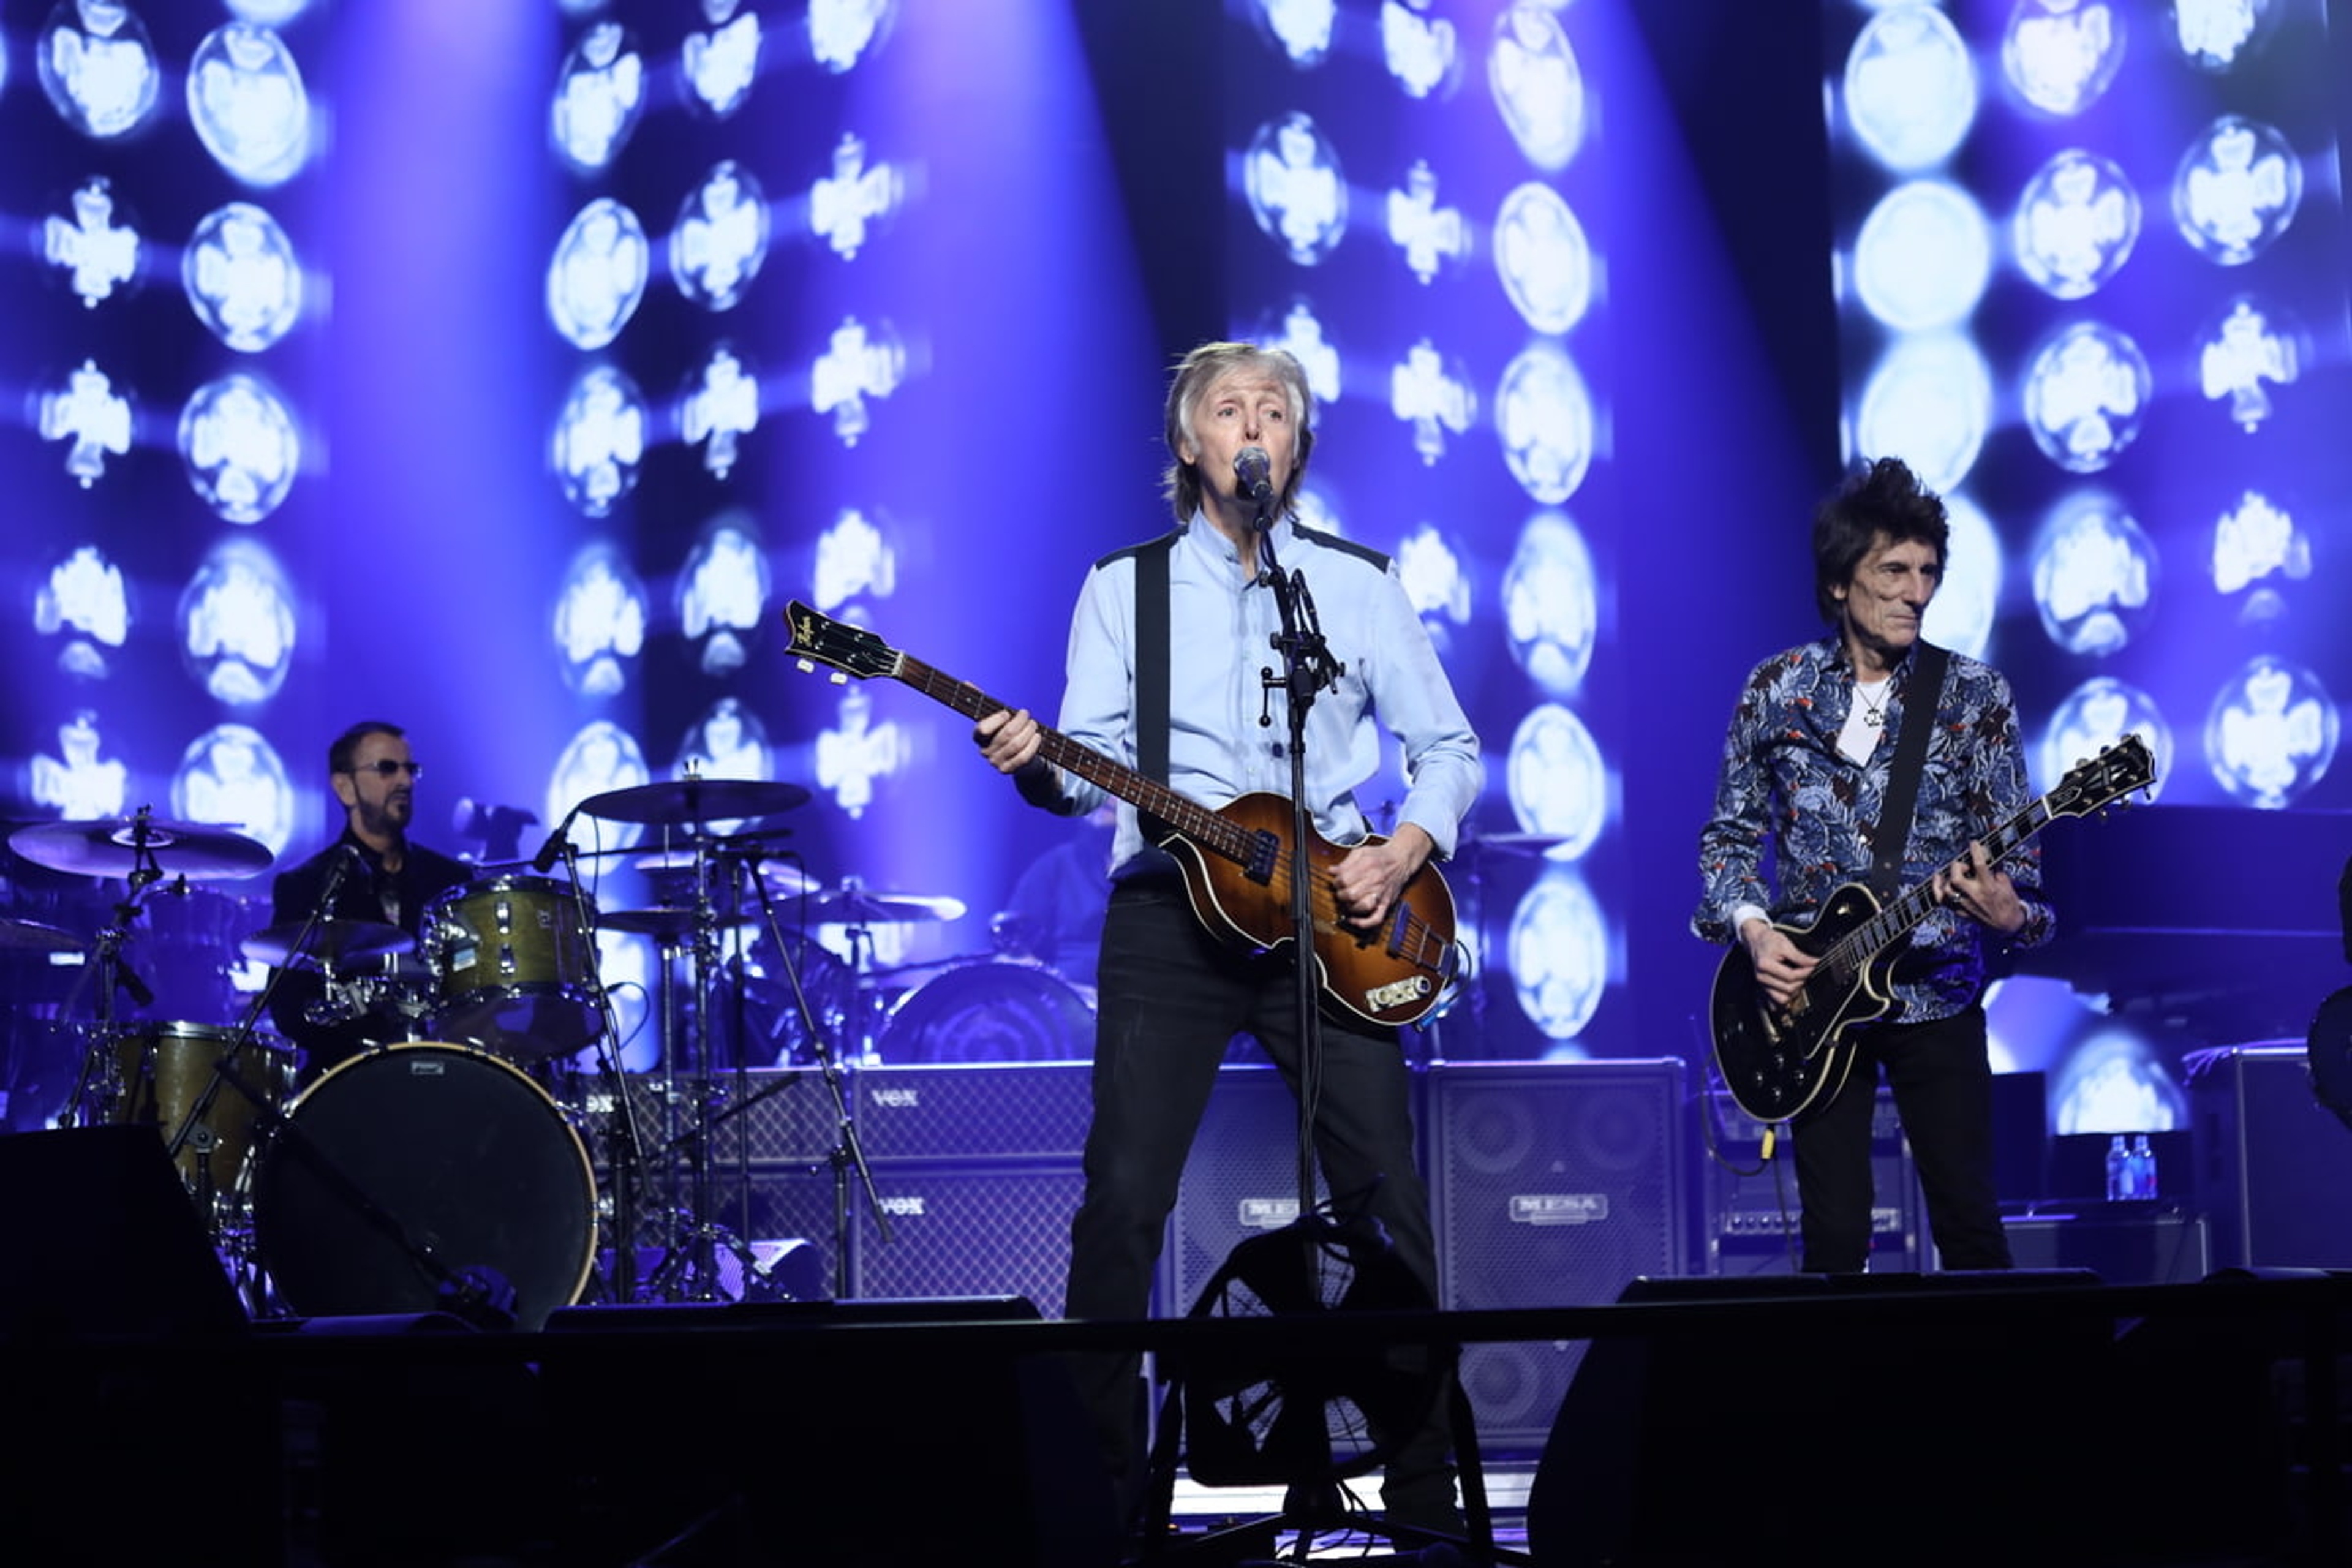 Ringo and Ronnie Wood join Paul on stage at the 02 Arena in London during Paul’s final show of 2018. 